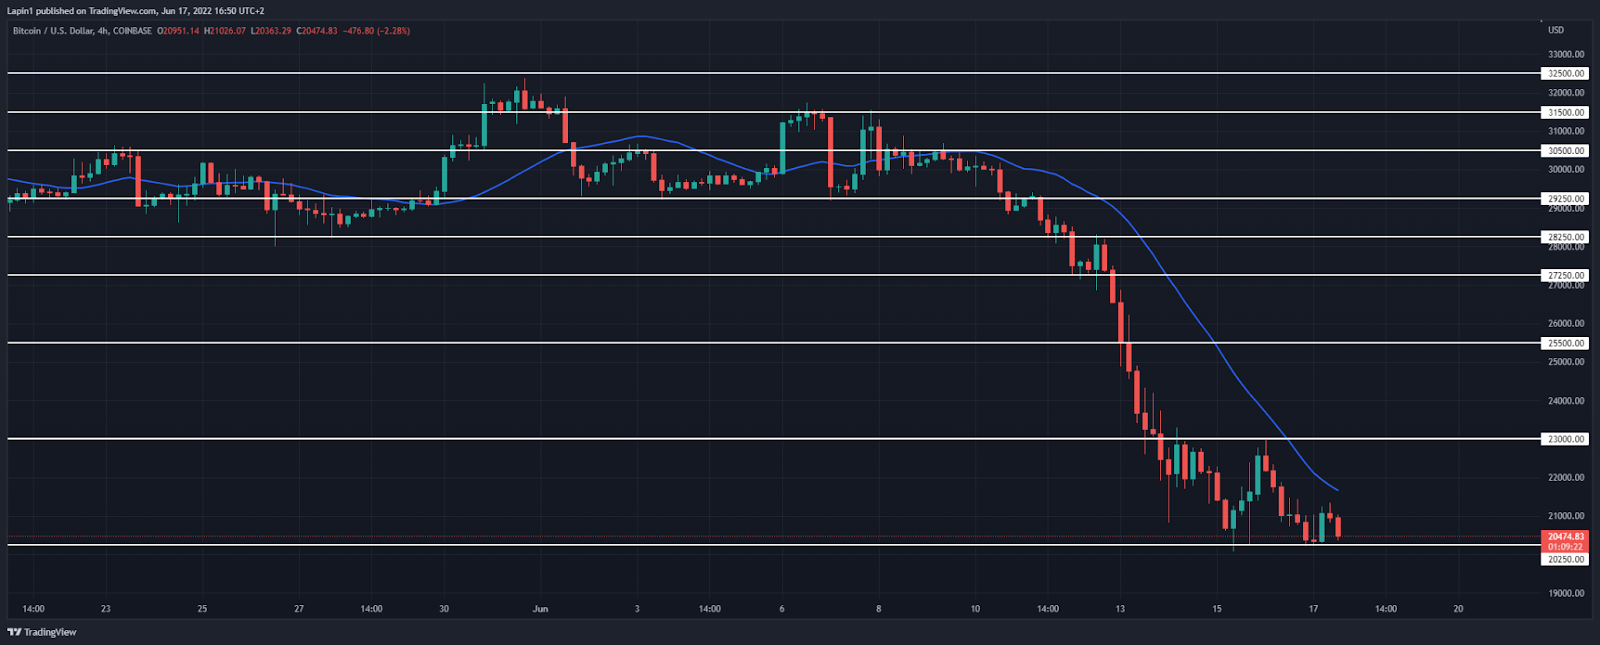 Bitcoin price analysis: BTC retests $20,250 support, another push lower incoming? 2